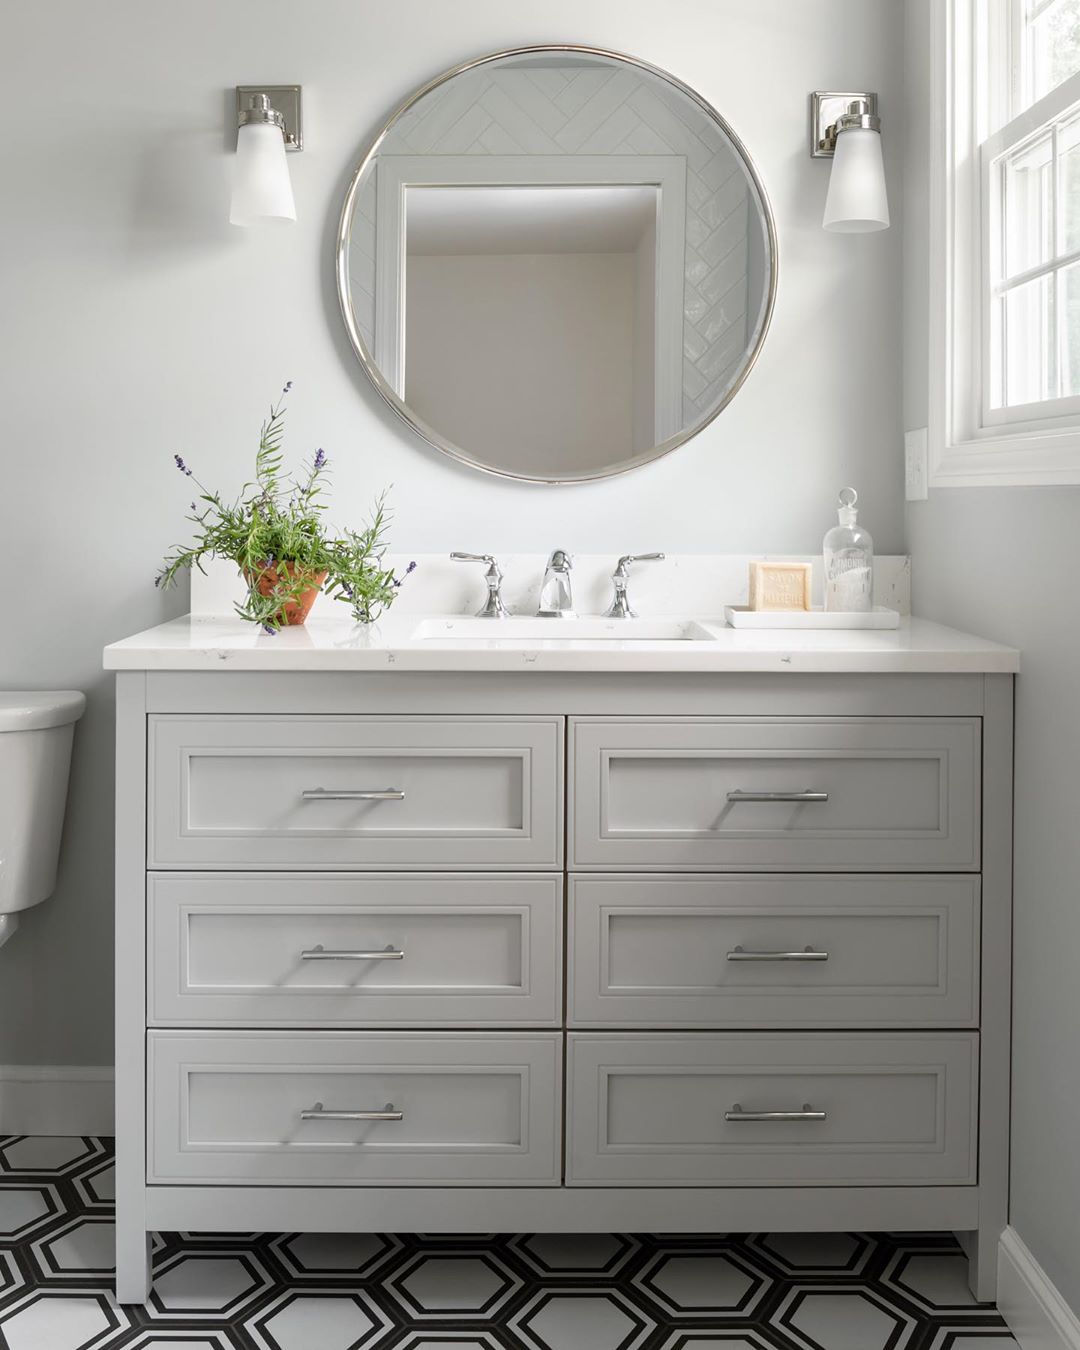 White bathroom with gray cabinets and round mirror above sink. Photo by Instagram user @tamara_flanagan_photo